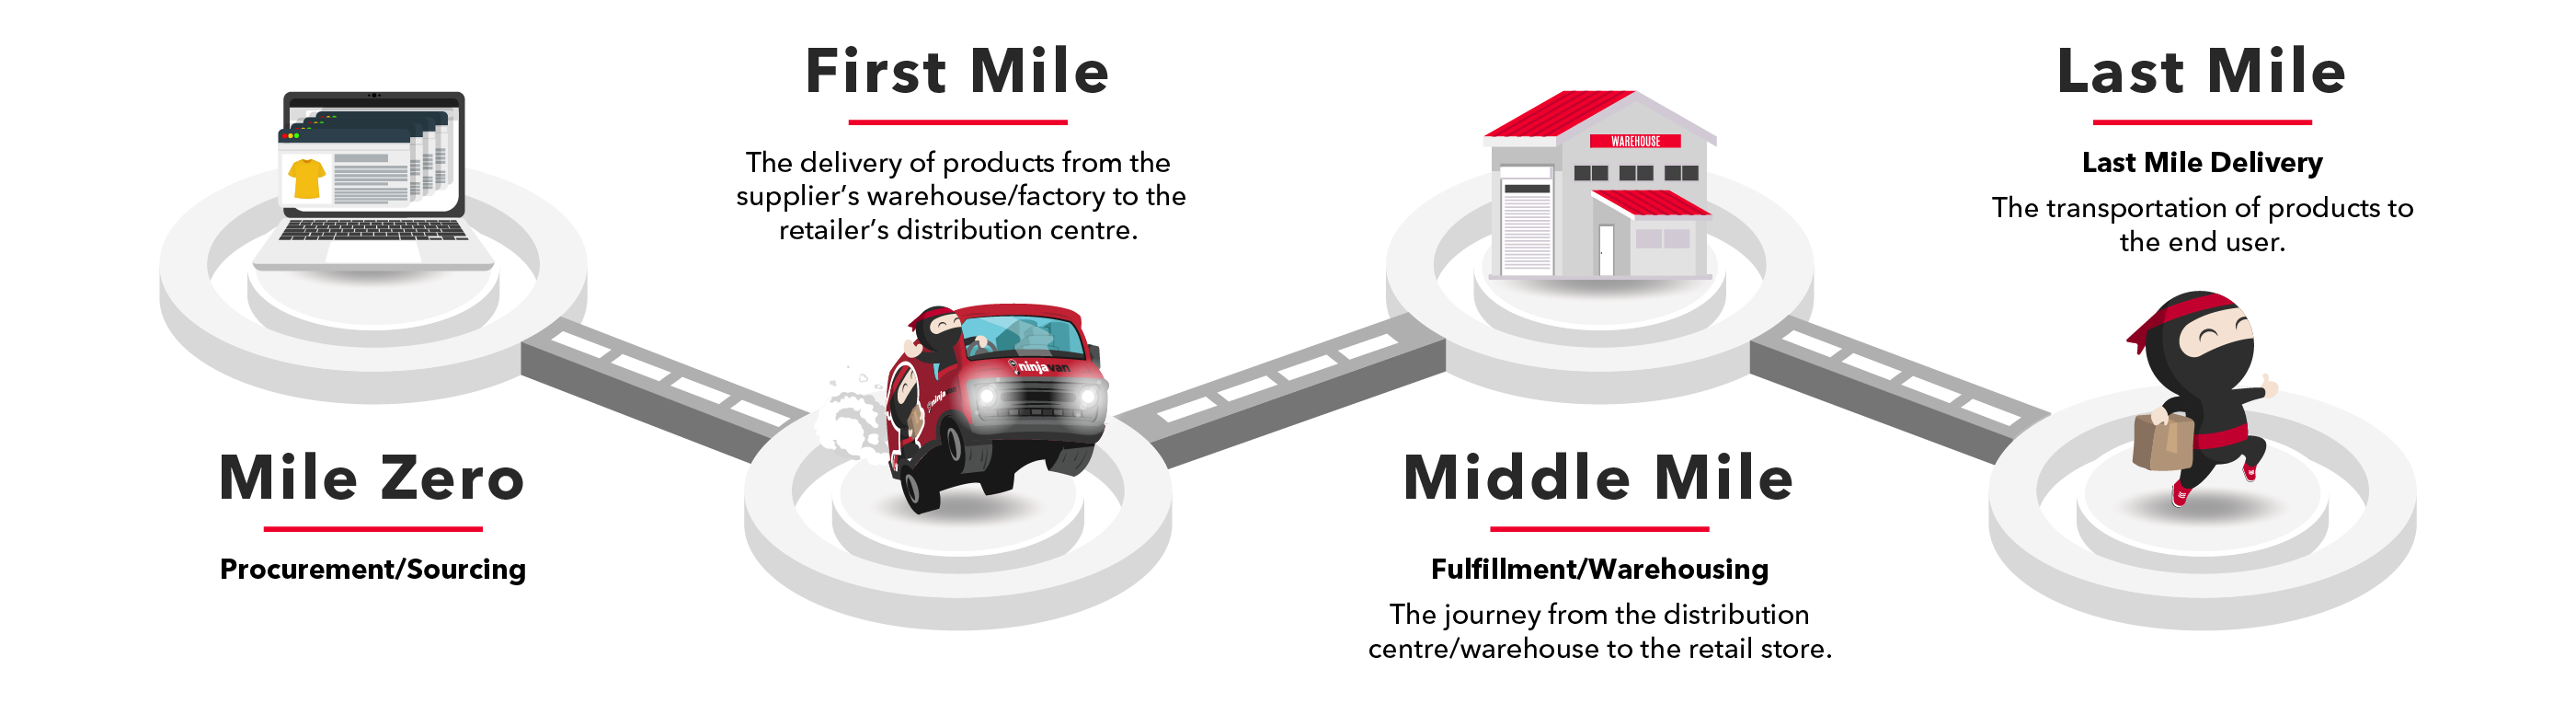 an infographic showing the process of the delivery process for Ninja Van from Mile Zero to the Last Mile